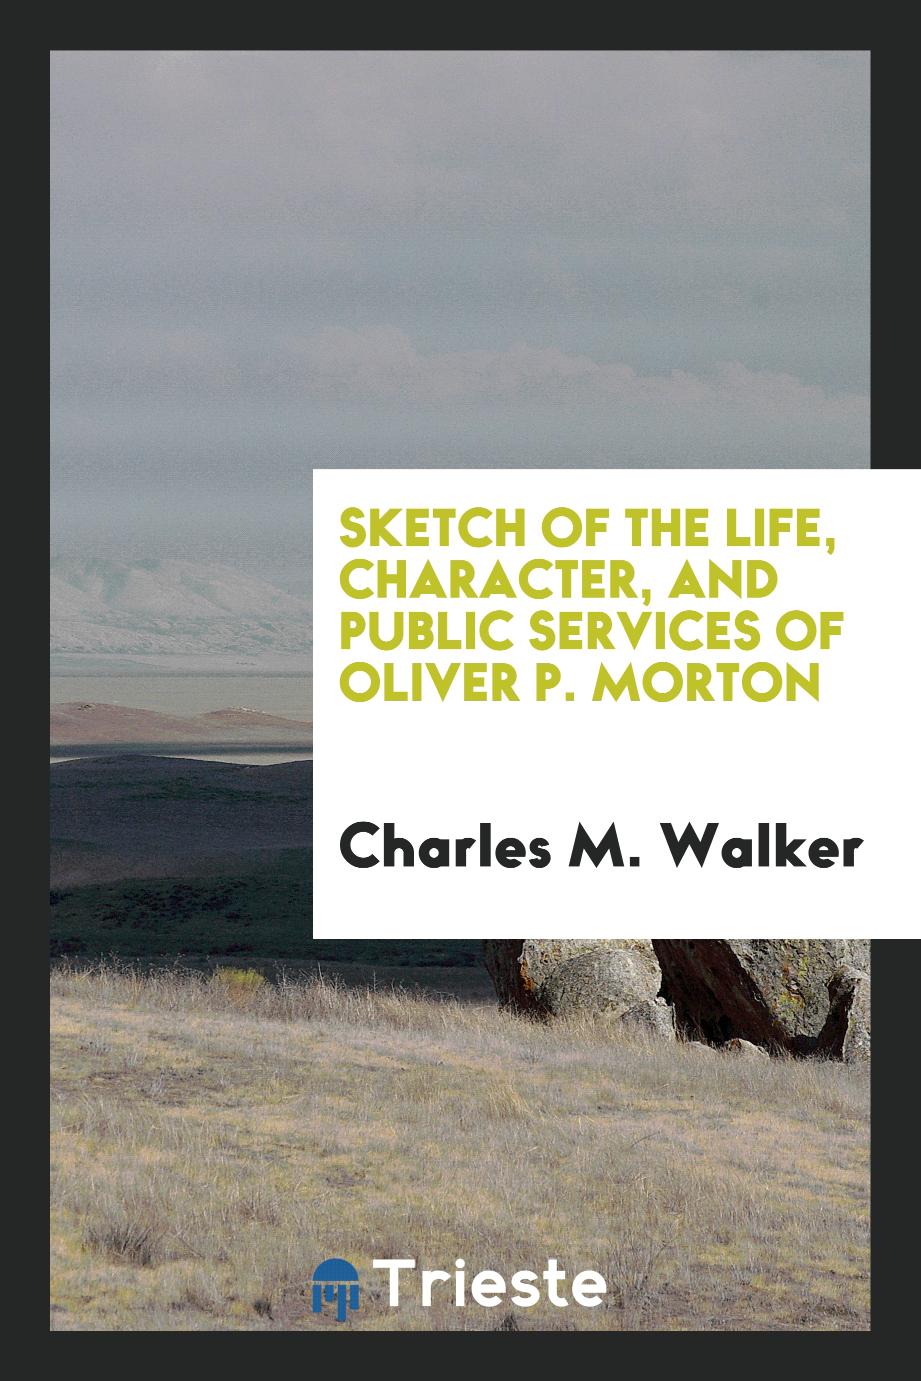 Sketch of the life, character, and public services of Oliver P. Morton